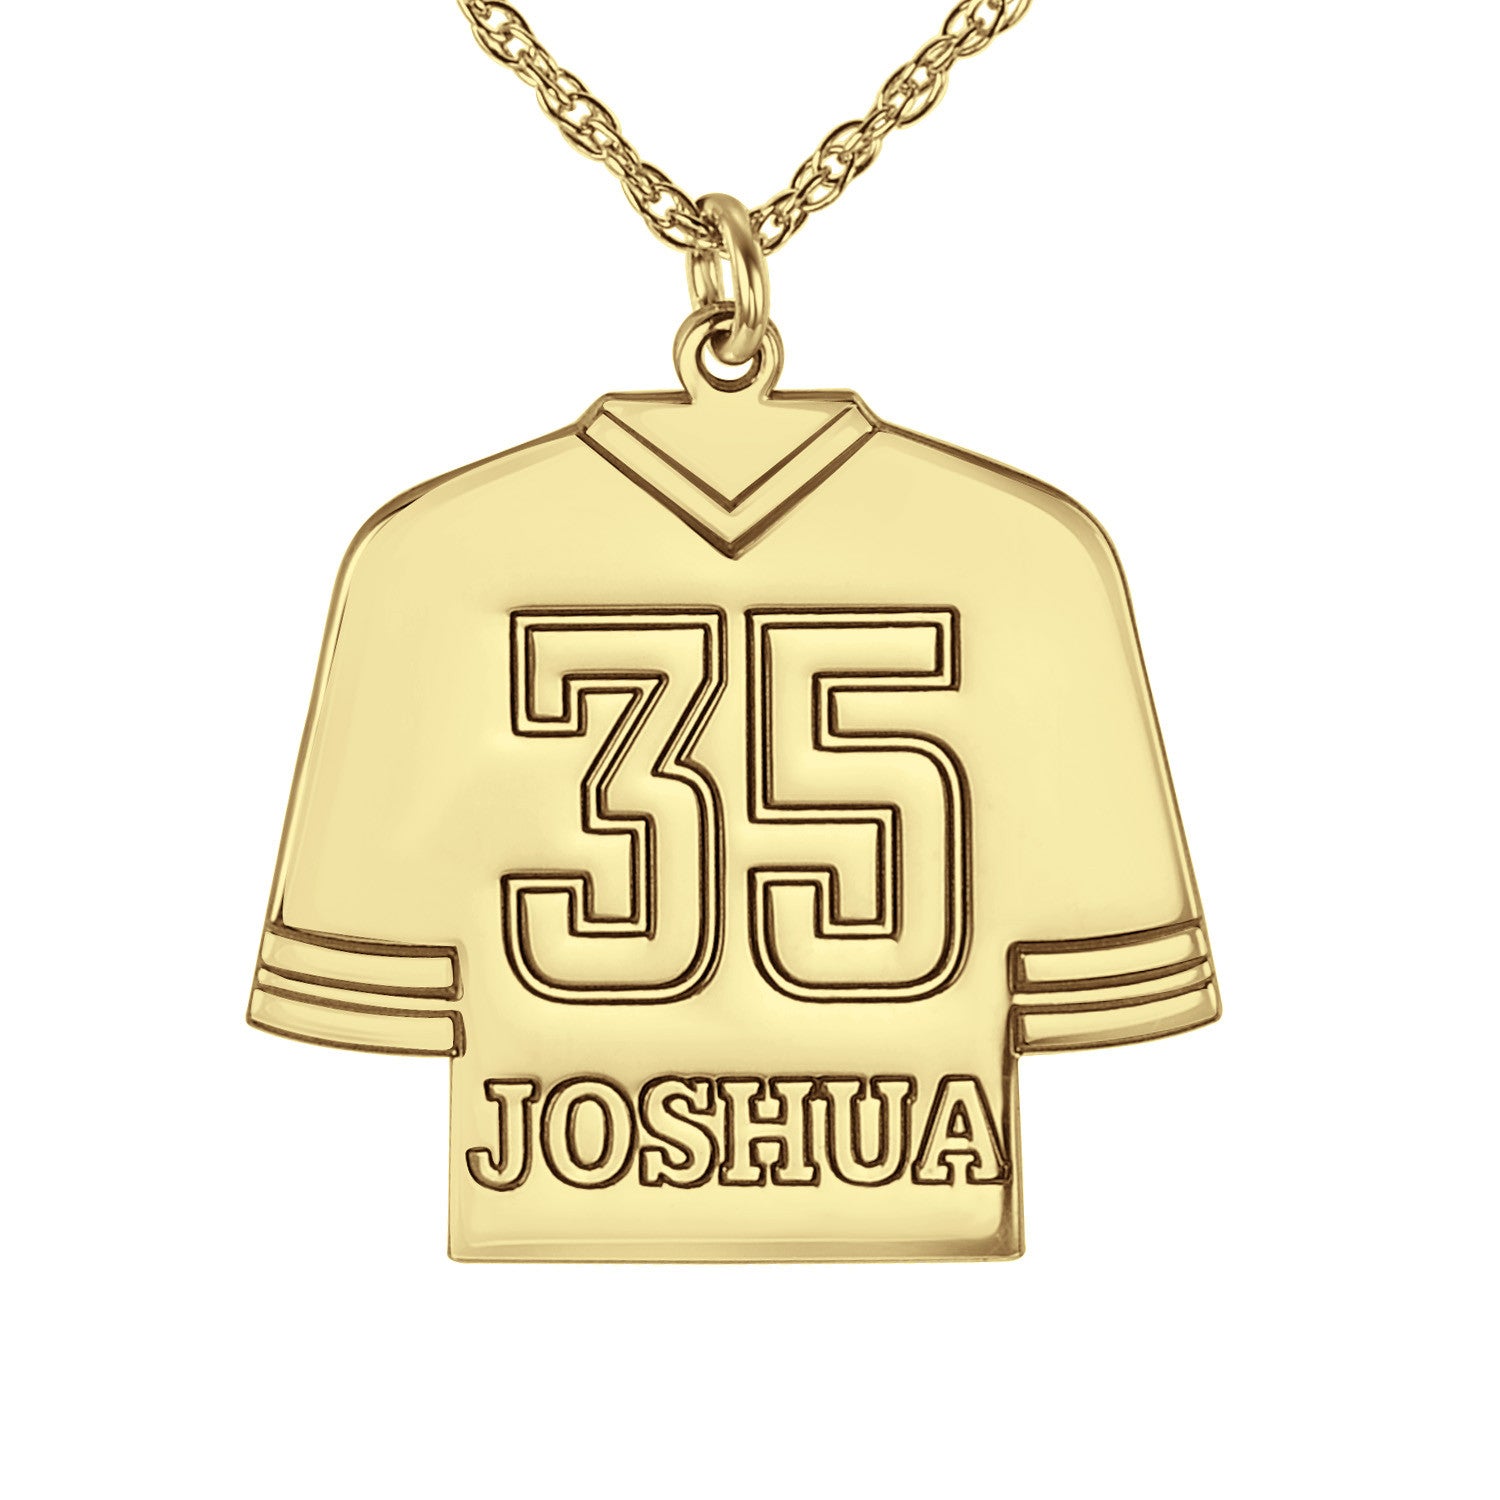 Custom Missouri St. Louis Hockey Fan Gold Necklace, Sport Engraved Gold Pendants, US Necklaces, 14K Gold Pendant, Gift for Her or His